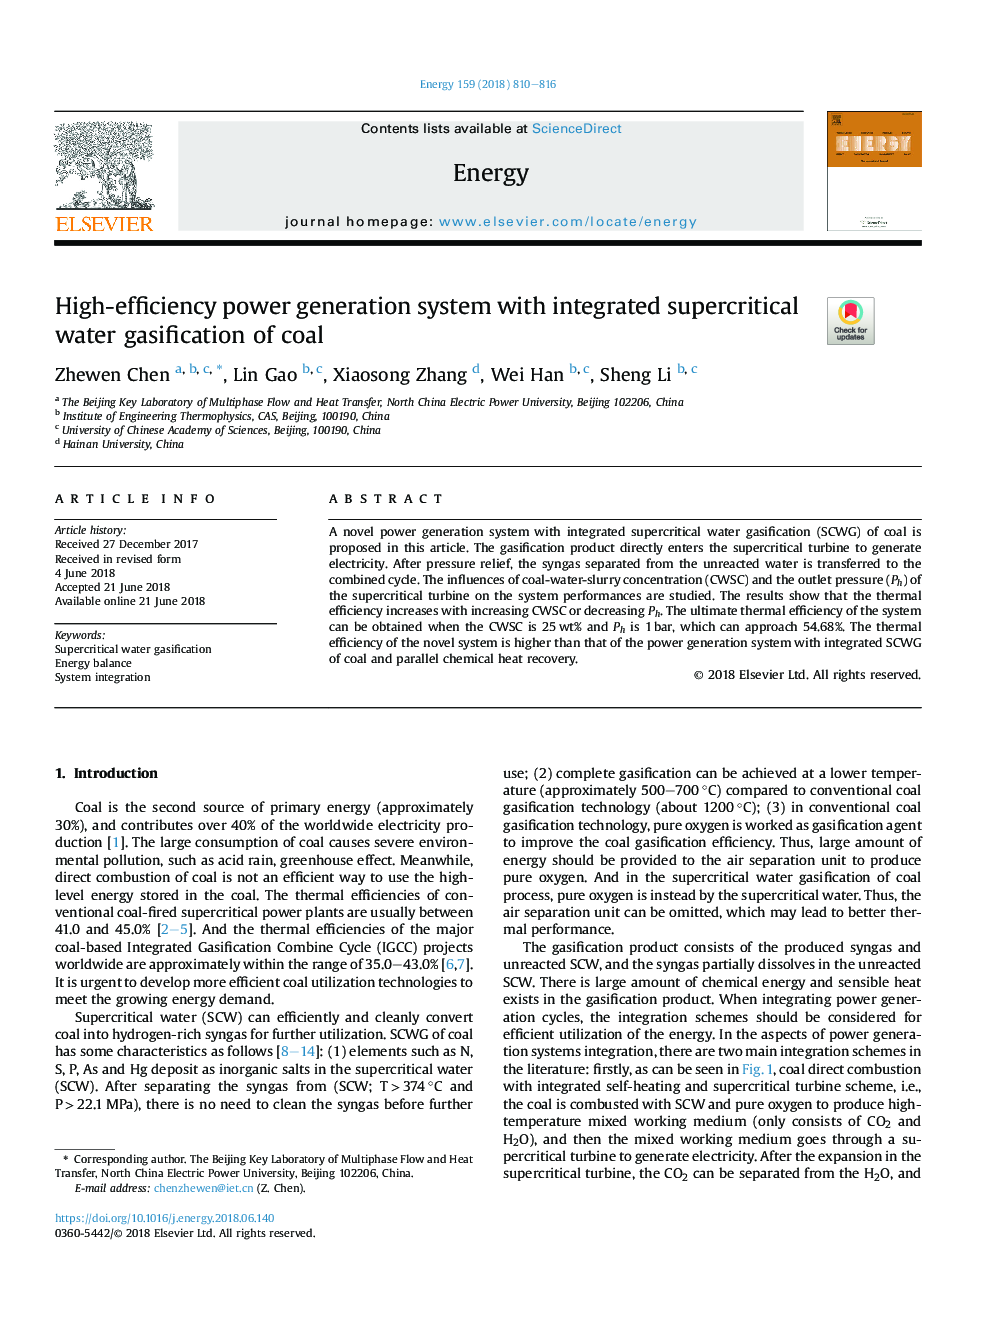 High-efficiency power generation system with integrated supercritical water gasification of coal